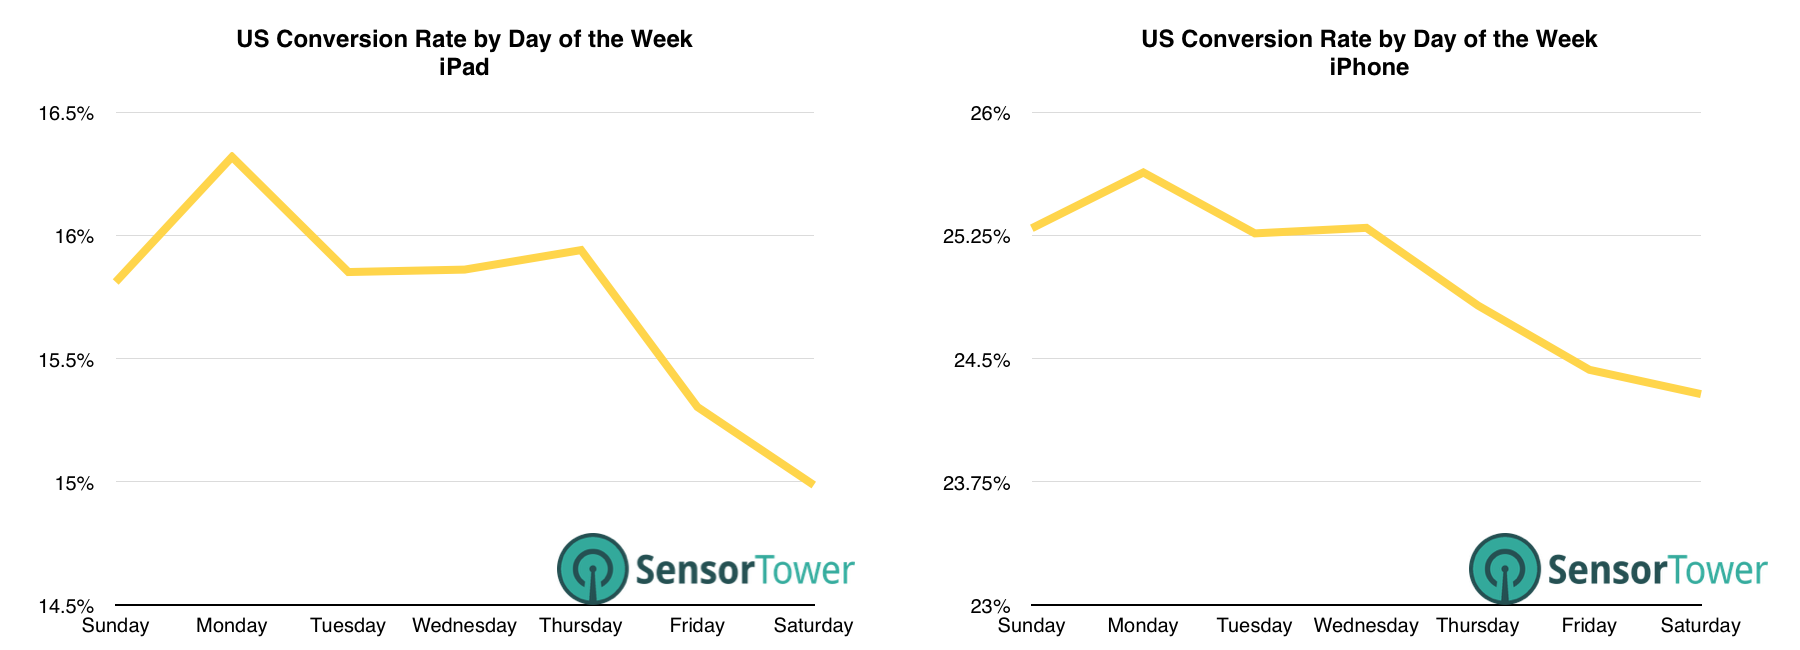 lt="Graphs Showing Conversion Rate for iPhone and iPad Apps by Weekday